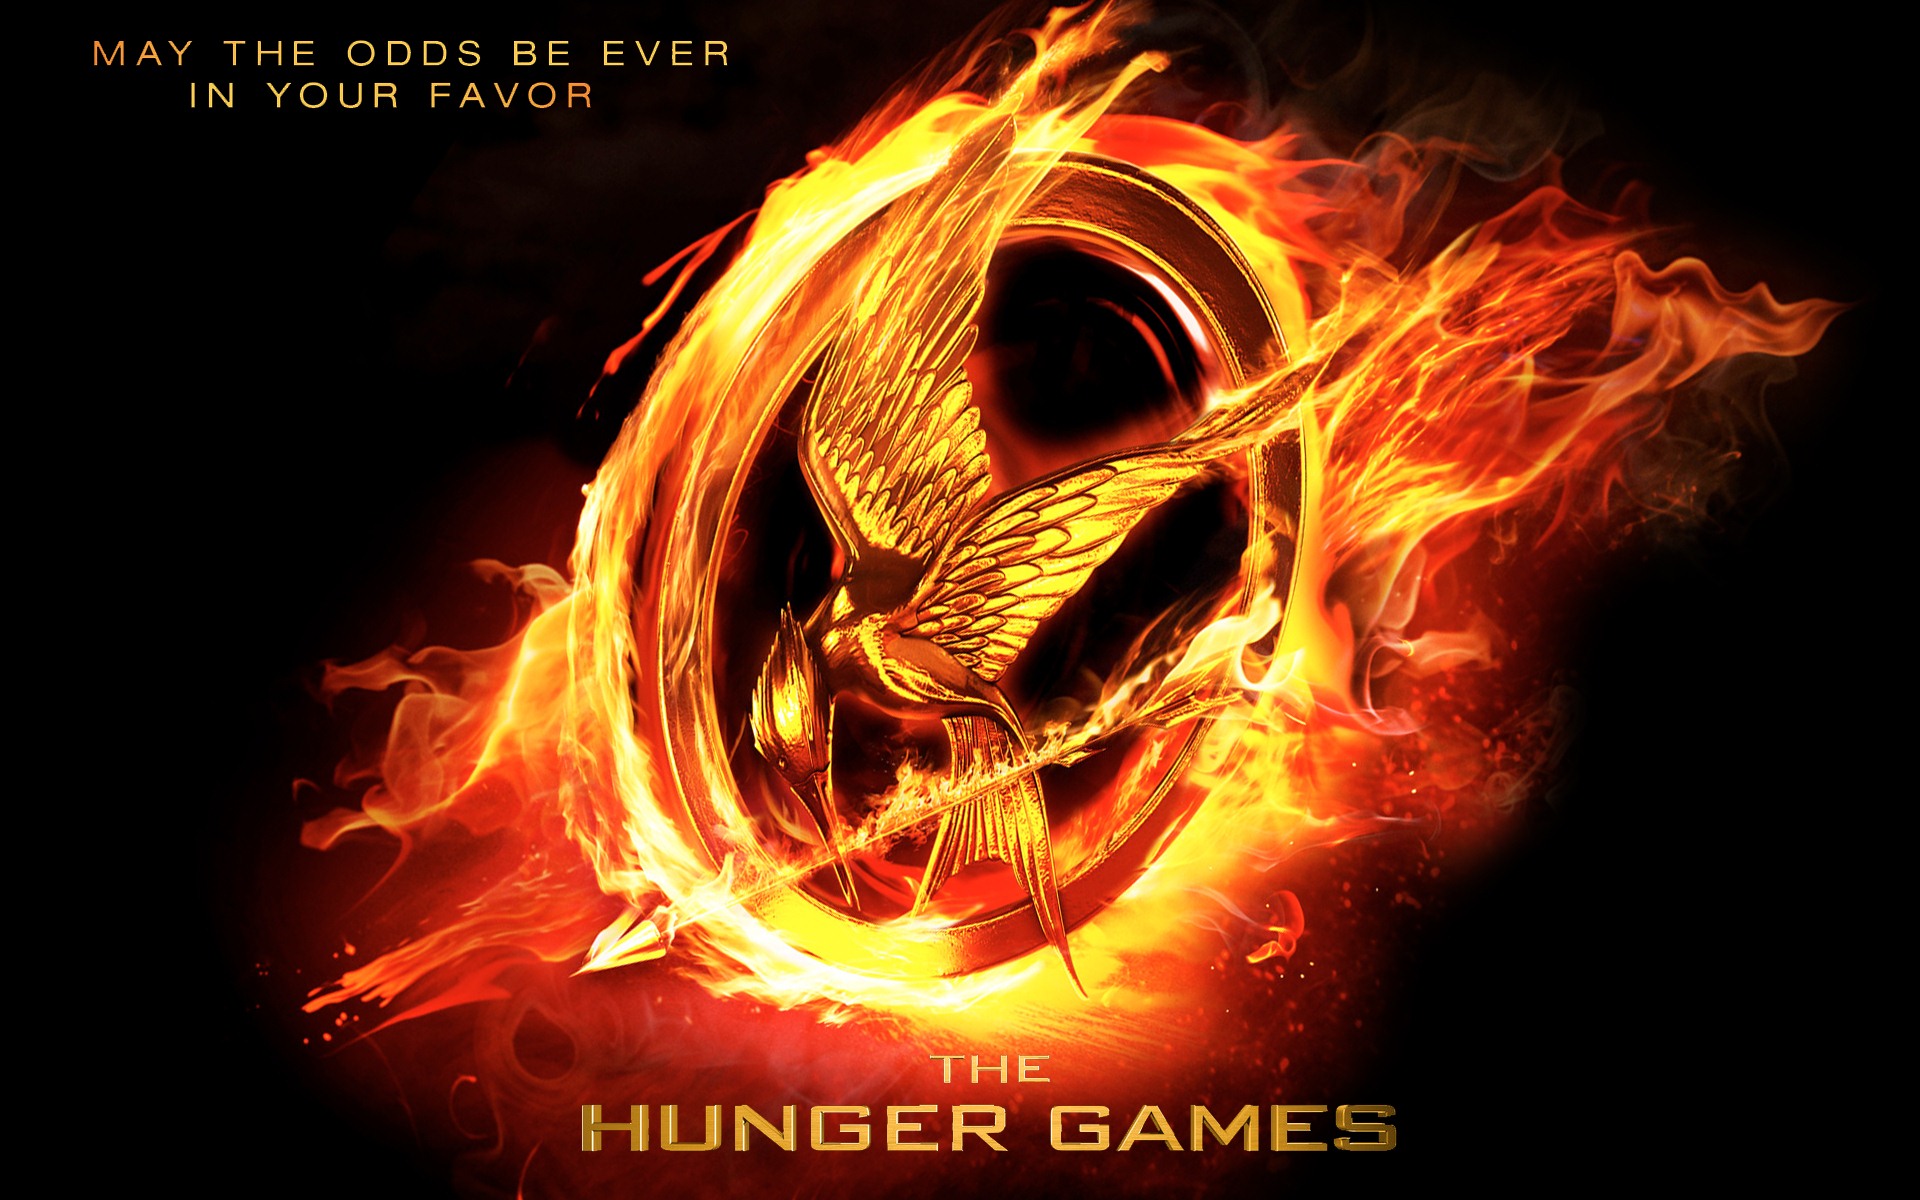 The Hunger Games HD wallpapers #13 - 1920x1200